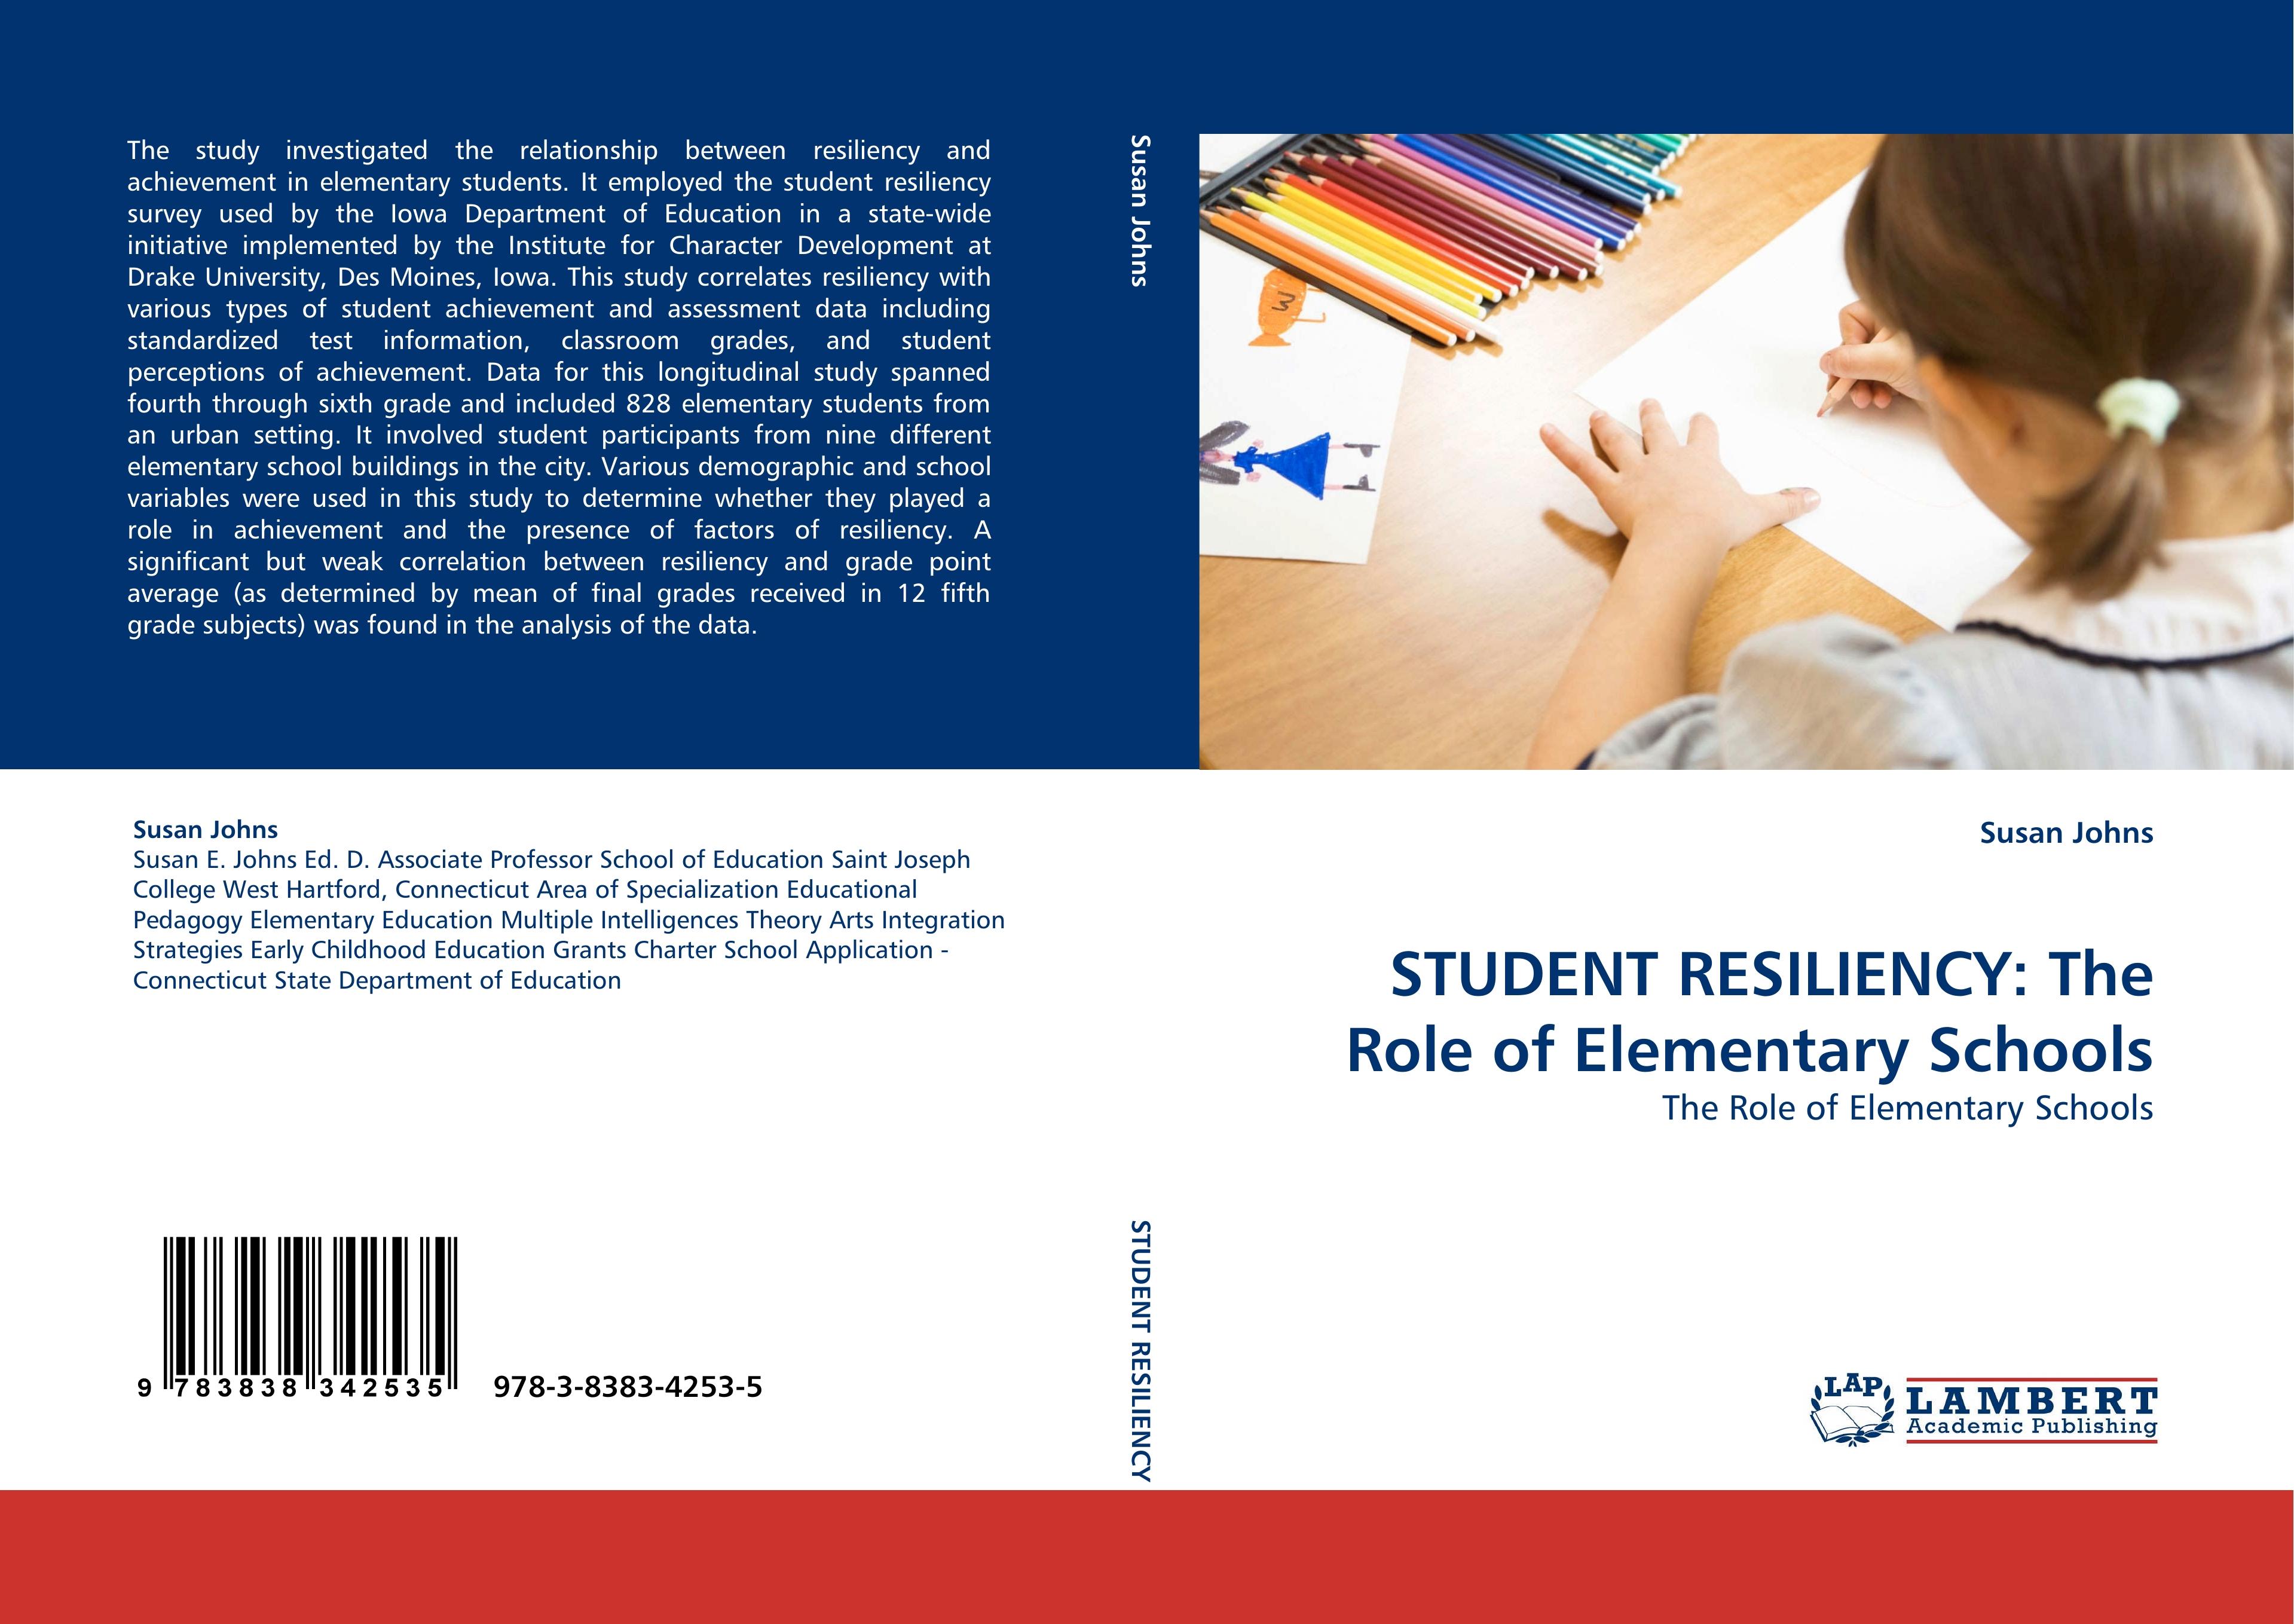 STUDENT RESILIENCY: The Role of Elementary Schools | The Role of Elementary Schools | Susan Johns | Taschenbuch | Paperback | 248 S. | Englisch | 2010 | LAP LAMBERT Academic Publishing - Johns, Susan